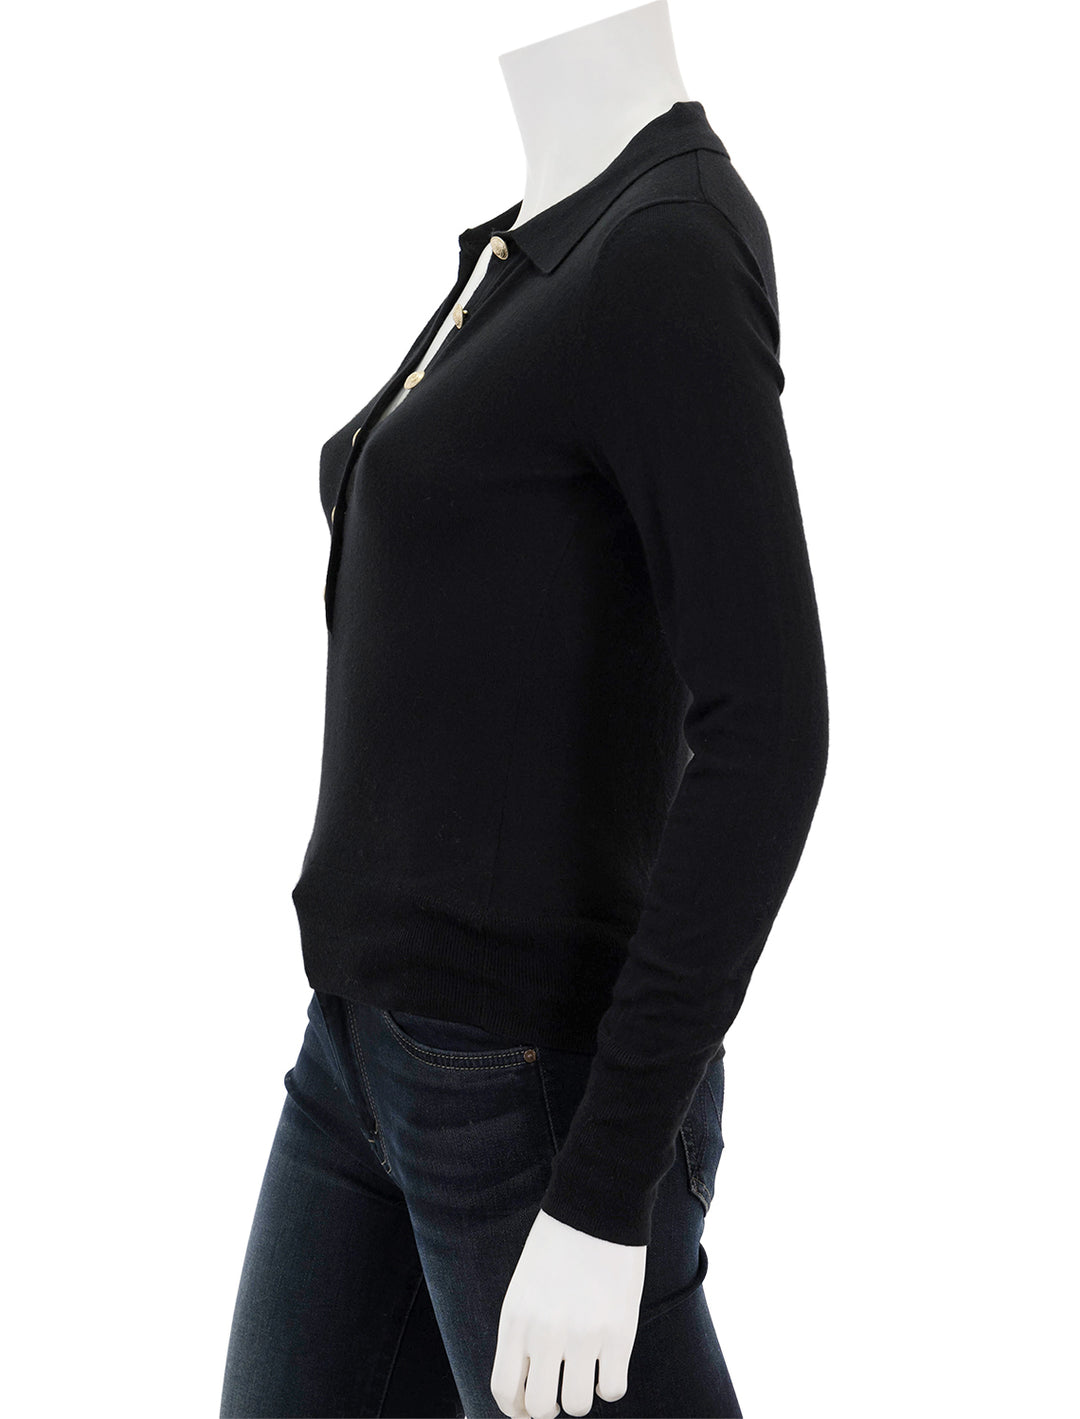 Side view of L'agence's sterling collared sweater in black.